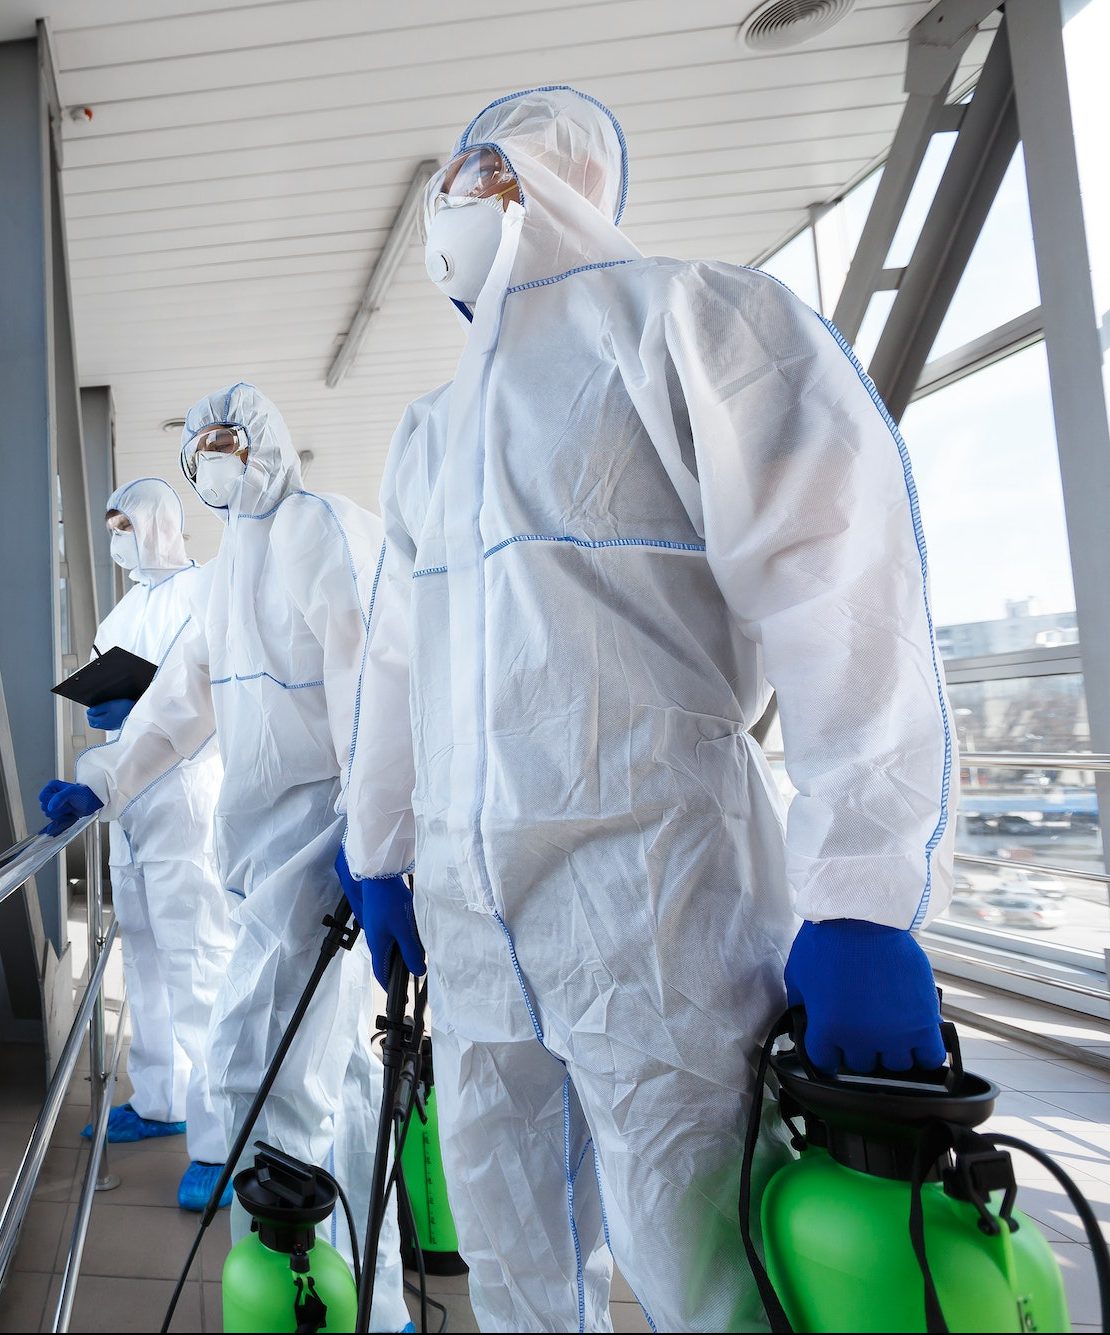 Medical workers in hazmat suits disinfecting with spray public places